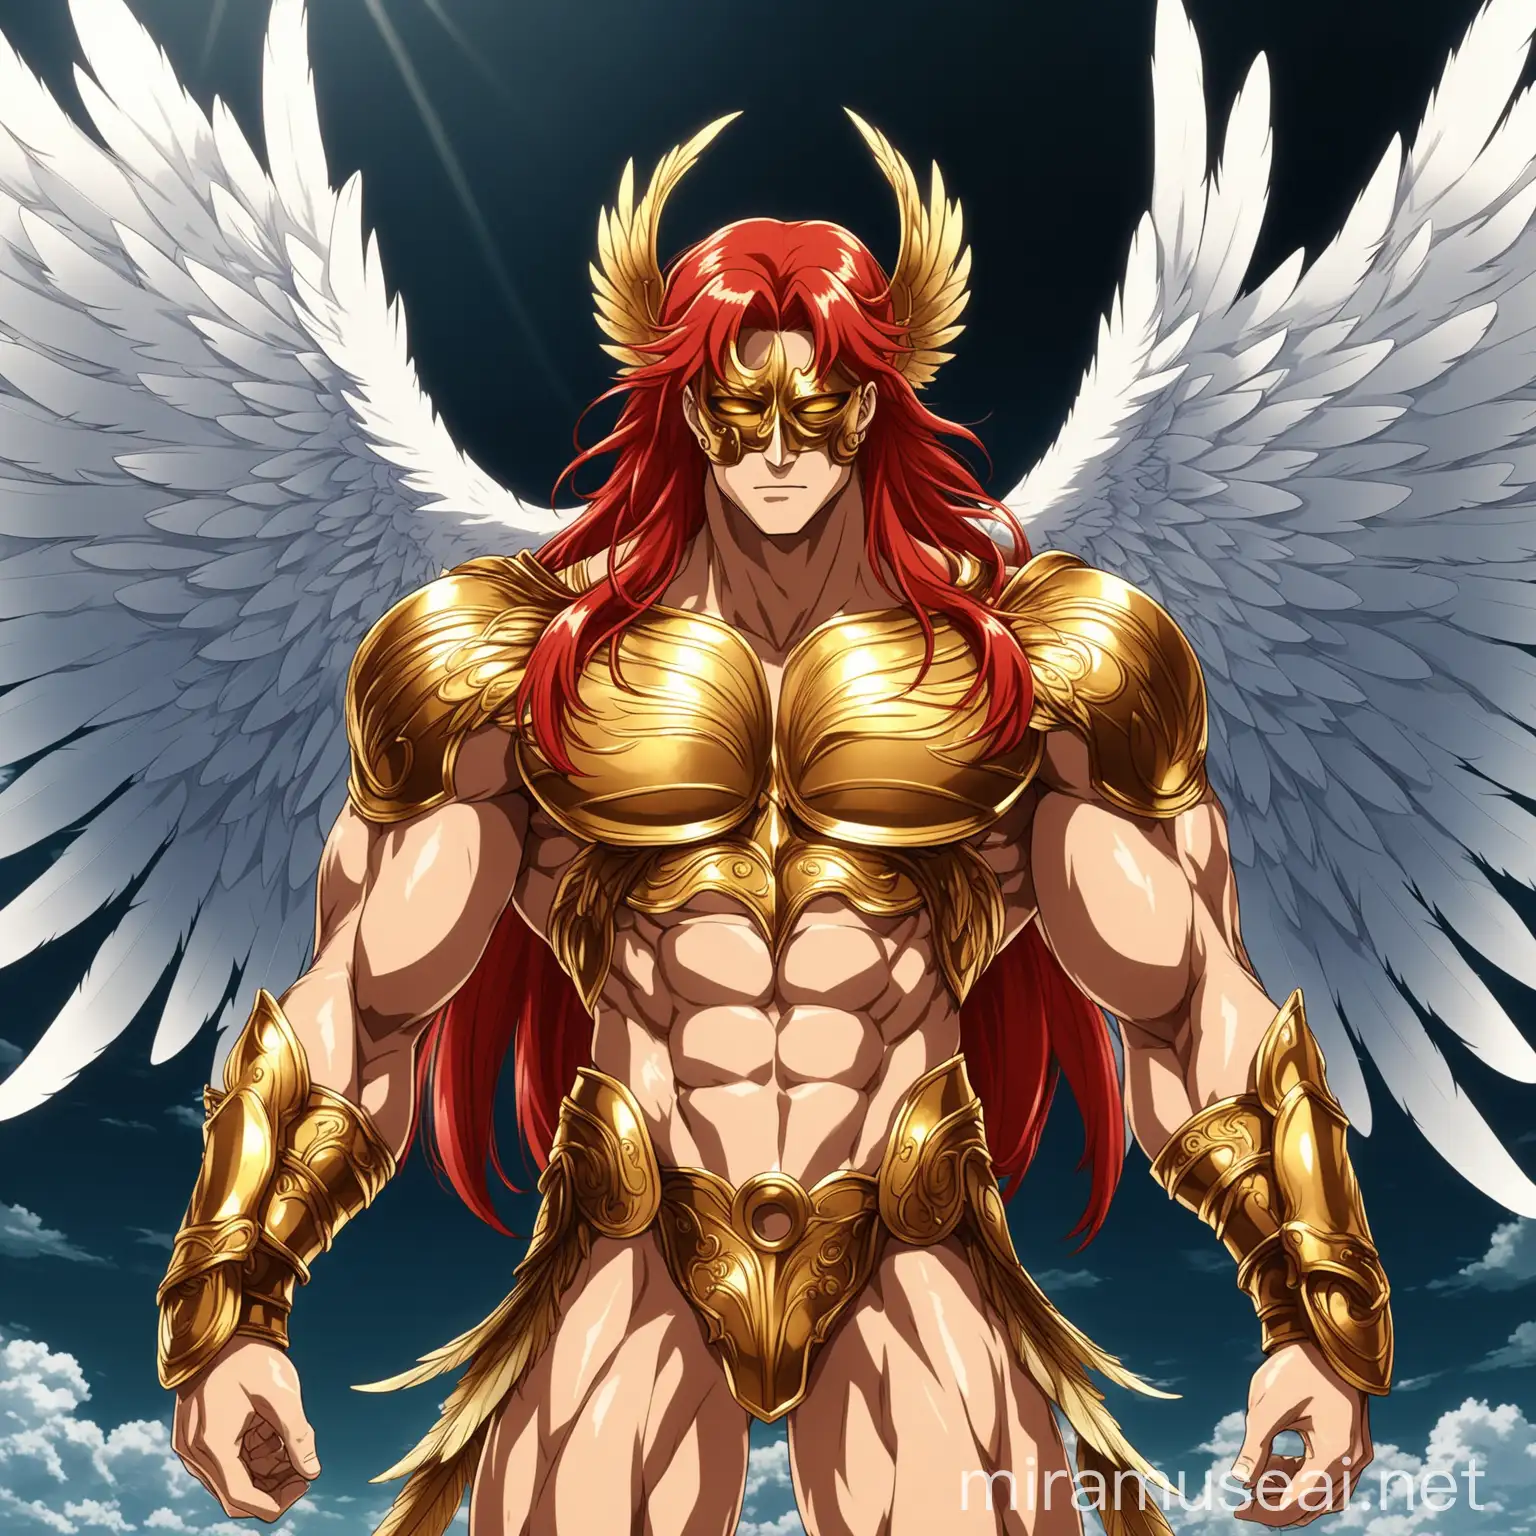 a muscular angel, he has angelic wings with feathers made of blades, he has long red hair, he has a golden mask, in anime